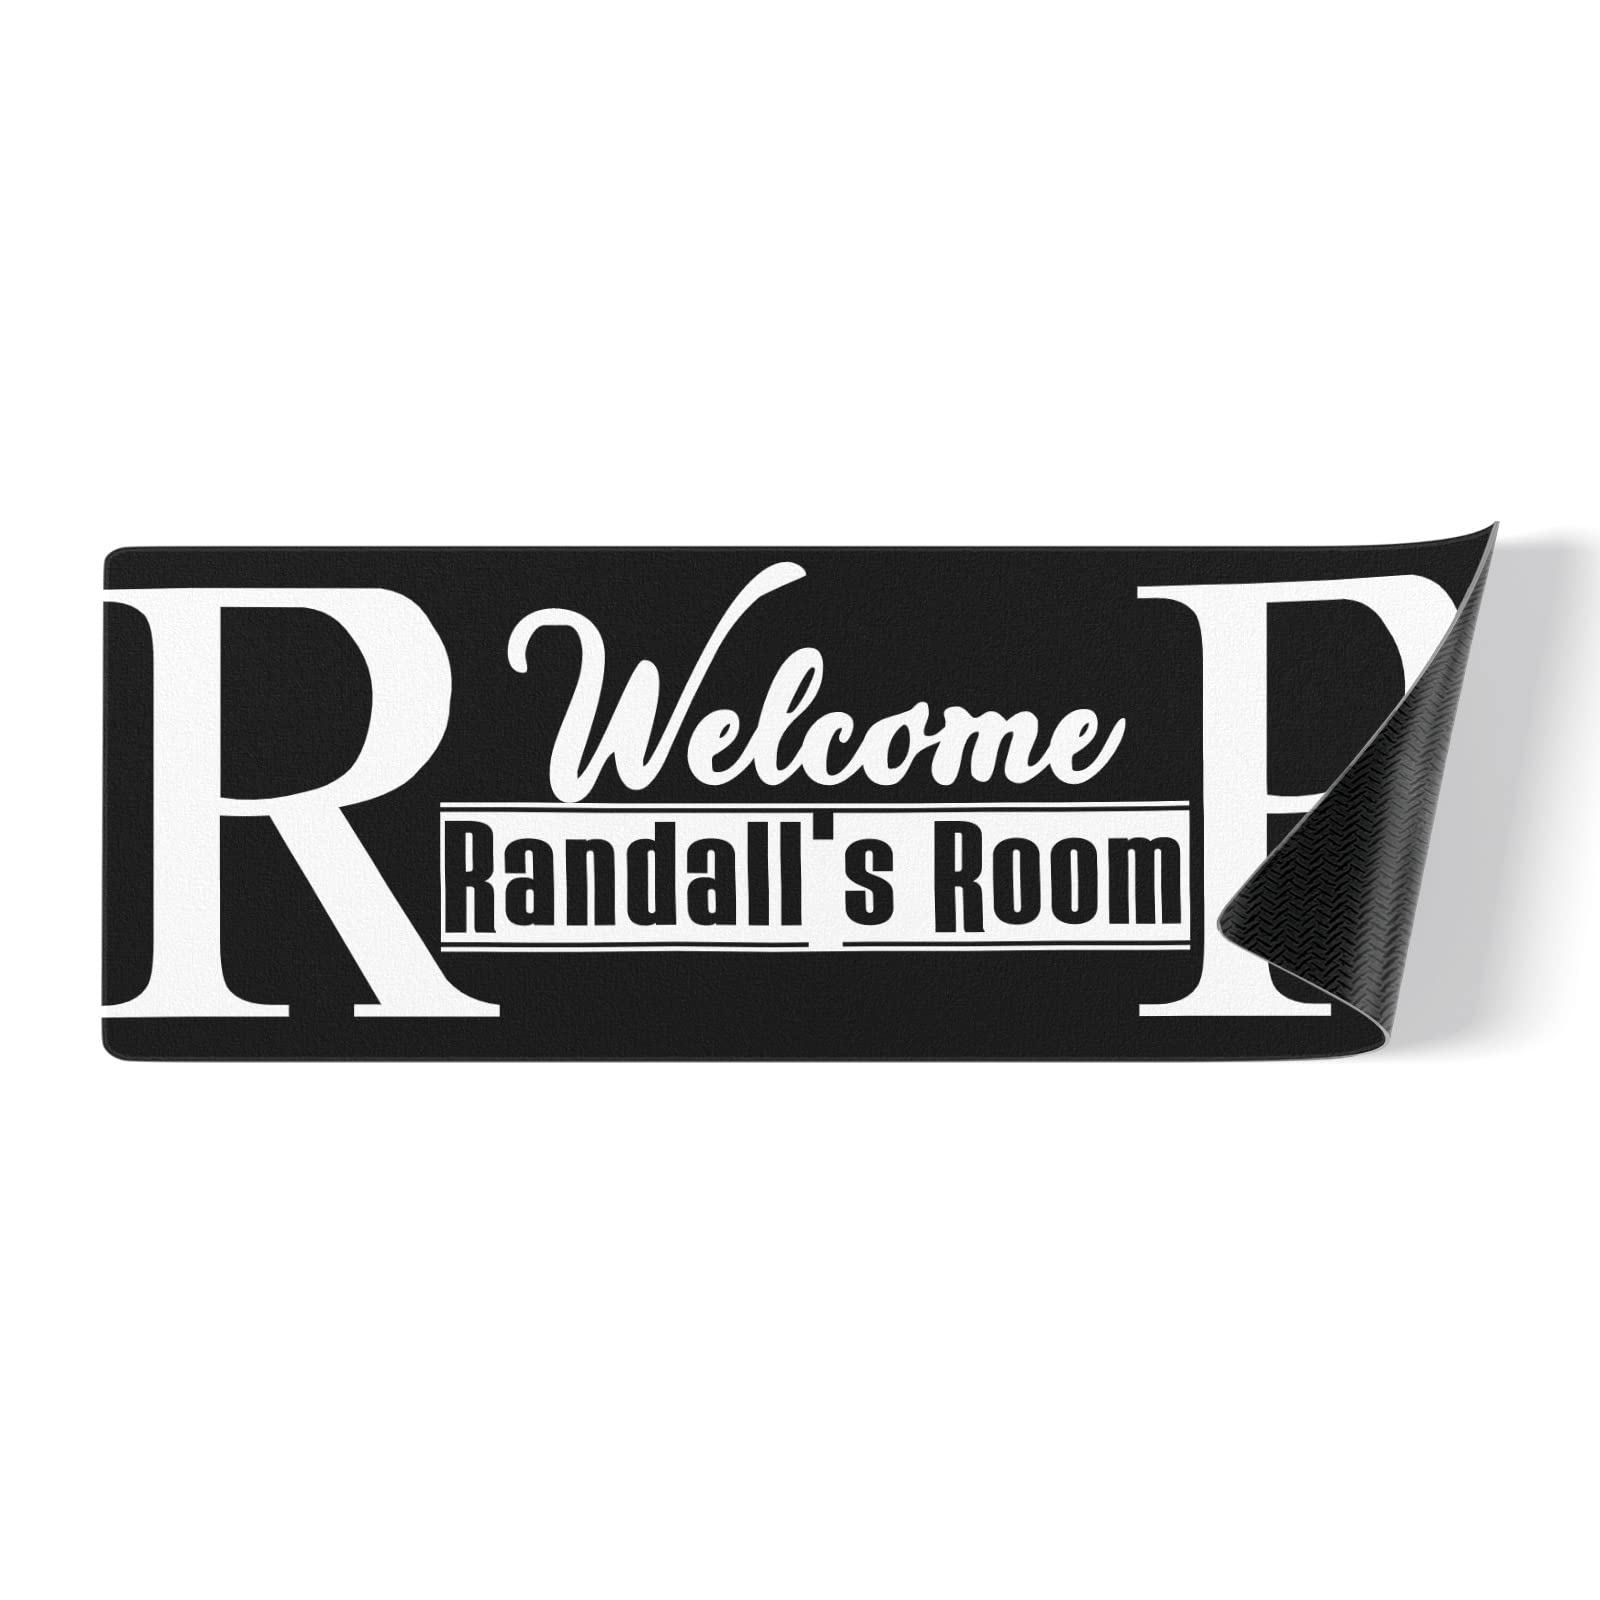 Custom Welcome Room Black White Kitchen Mats with Name Text Non Slip Soft Rubber Doormats Runner Carpets Rugs for Bathroom Bedroom Laundry Decor 48x17 Inch